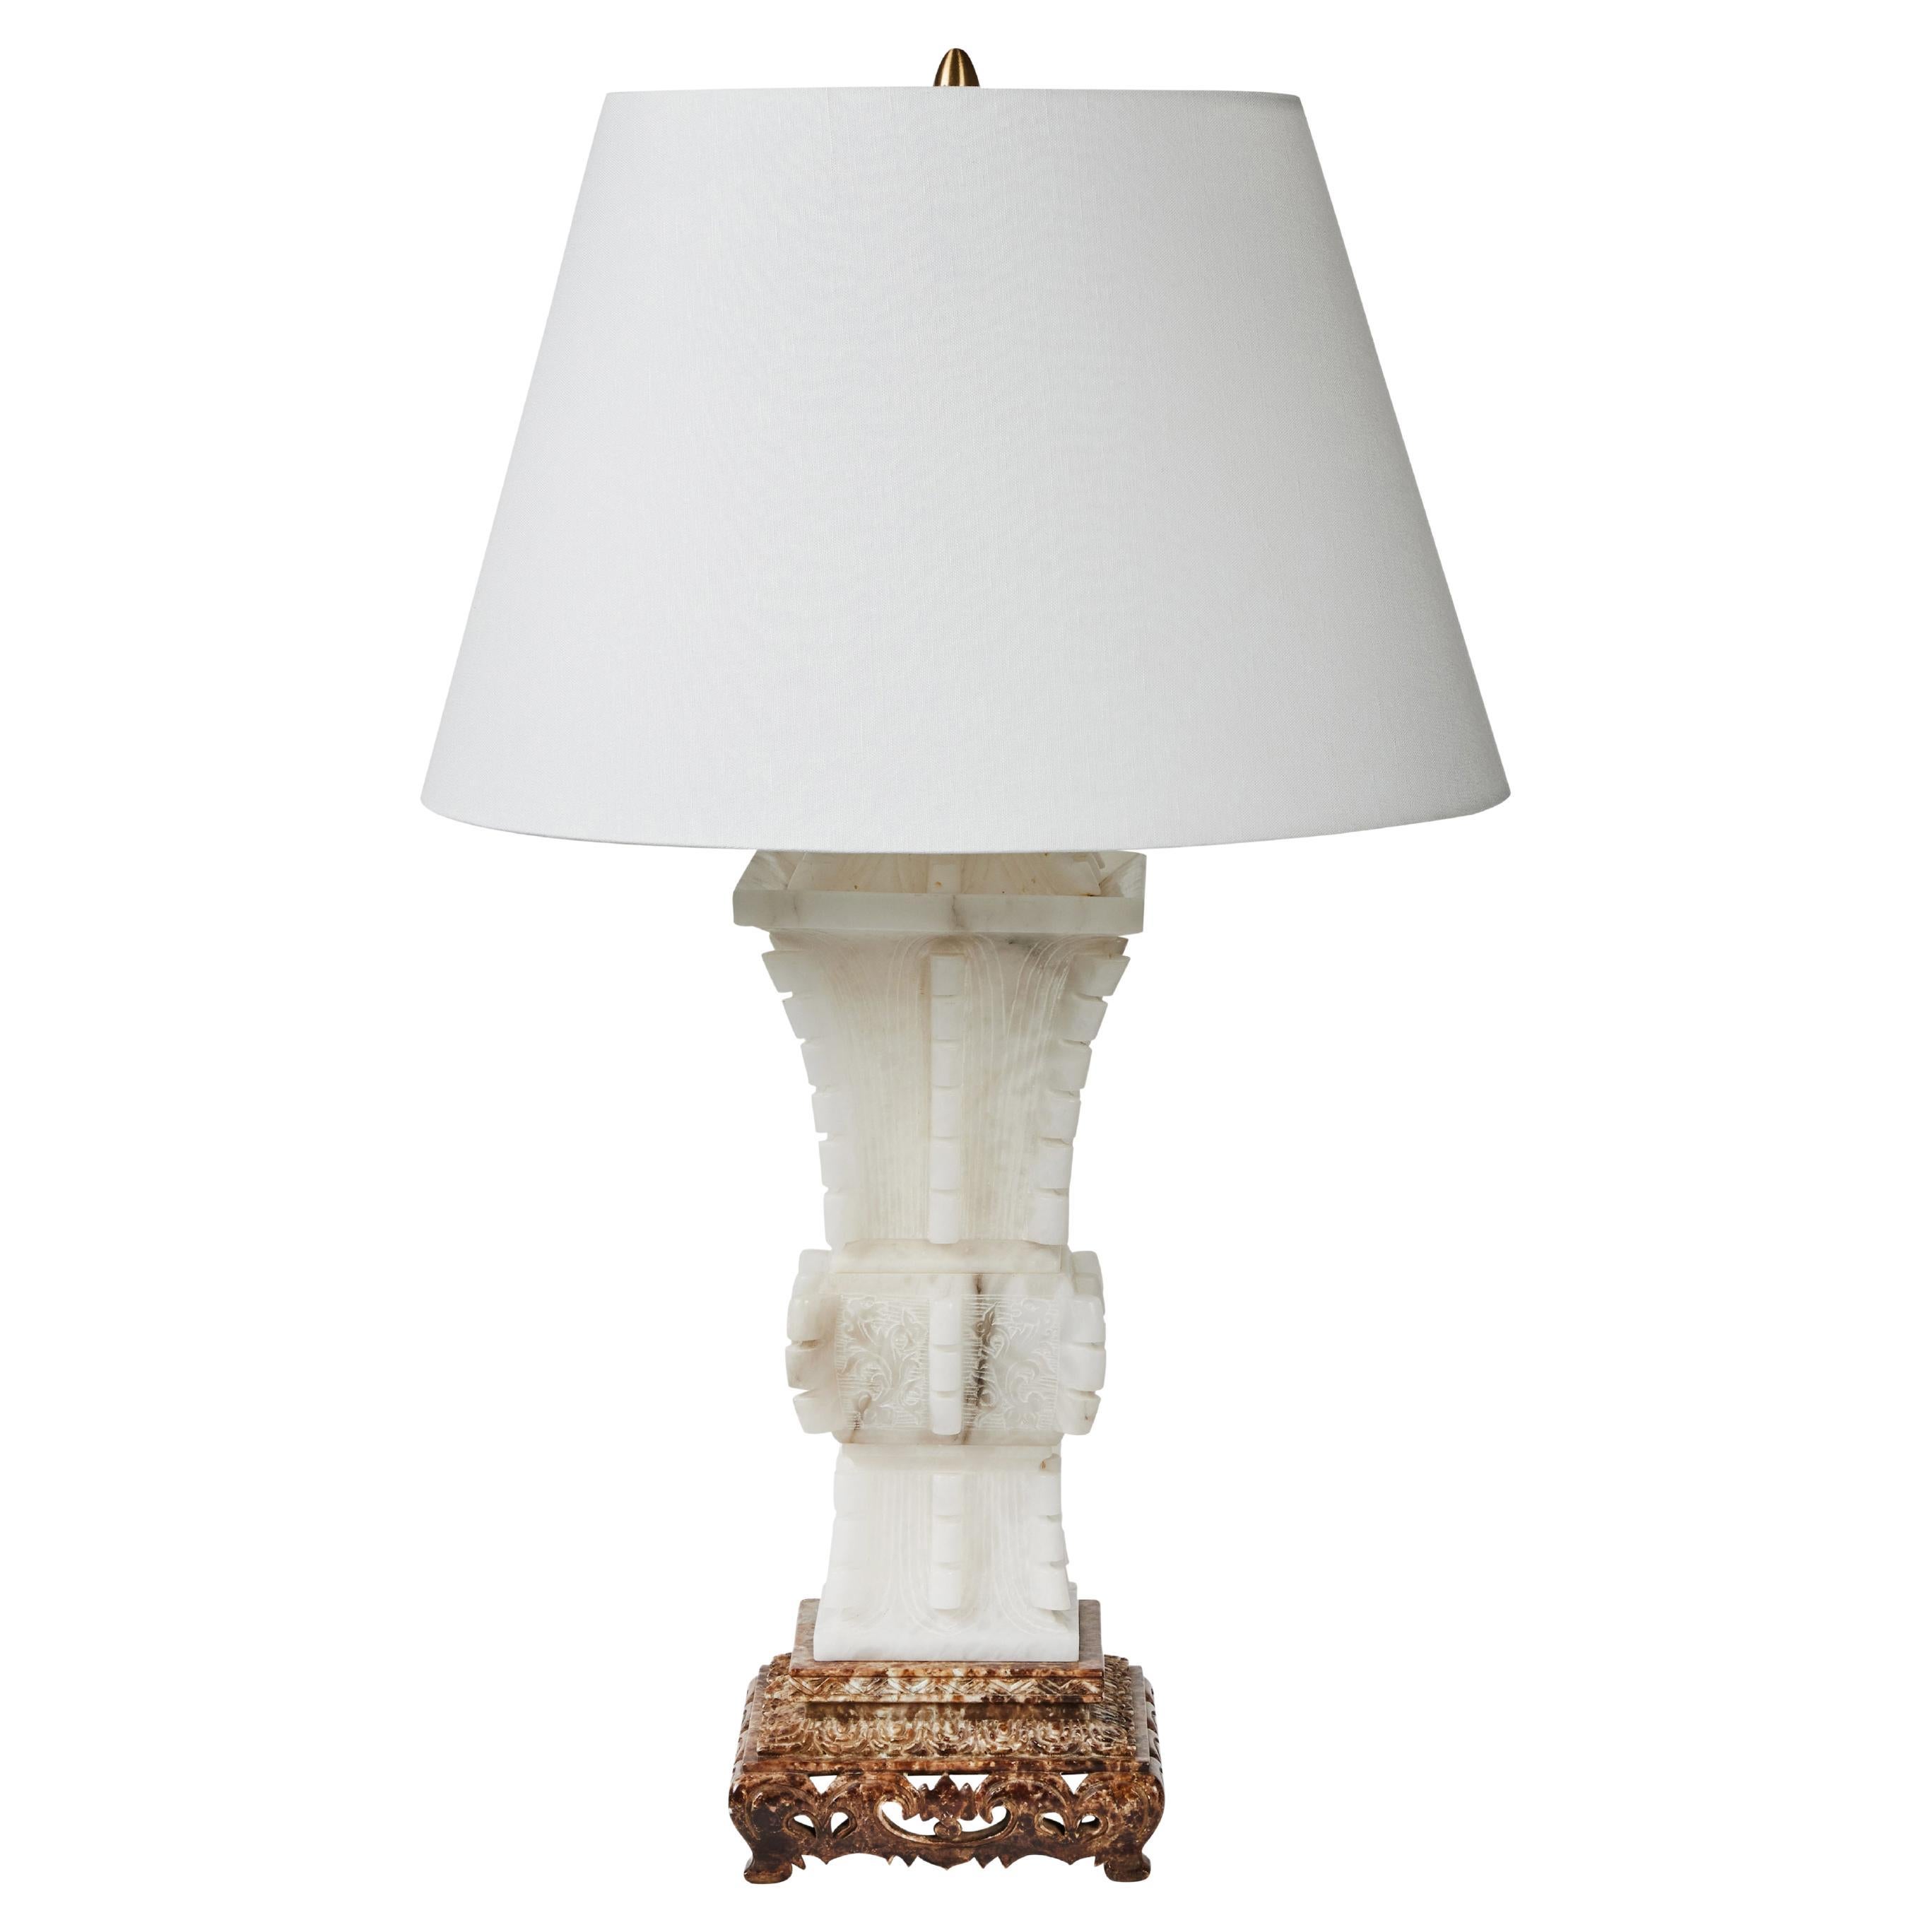 What is the history of Marbro lamps?